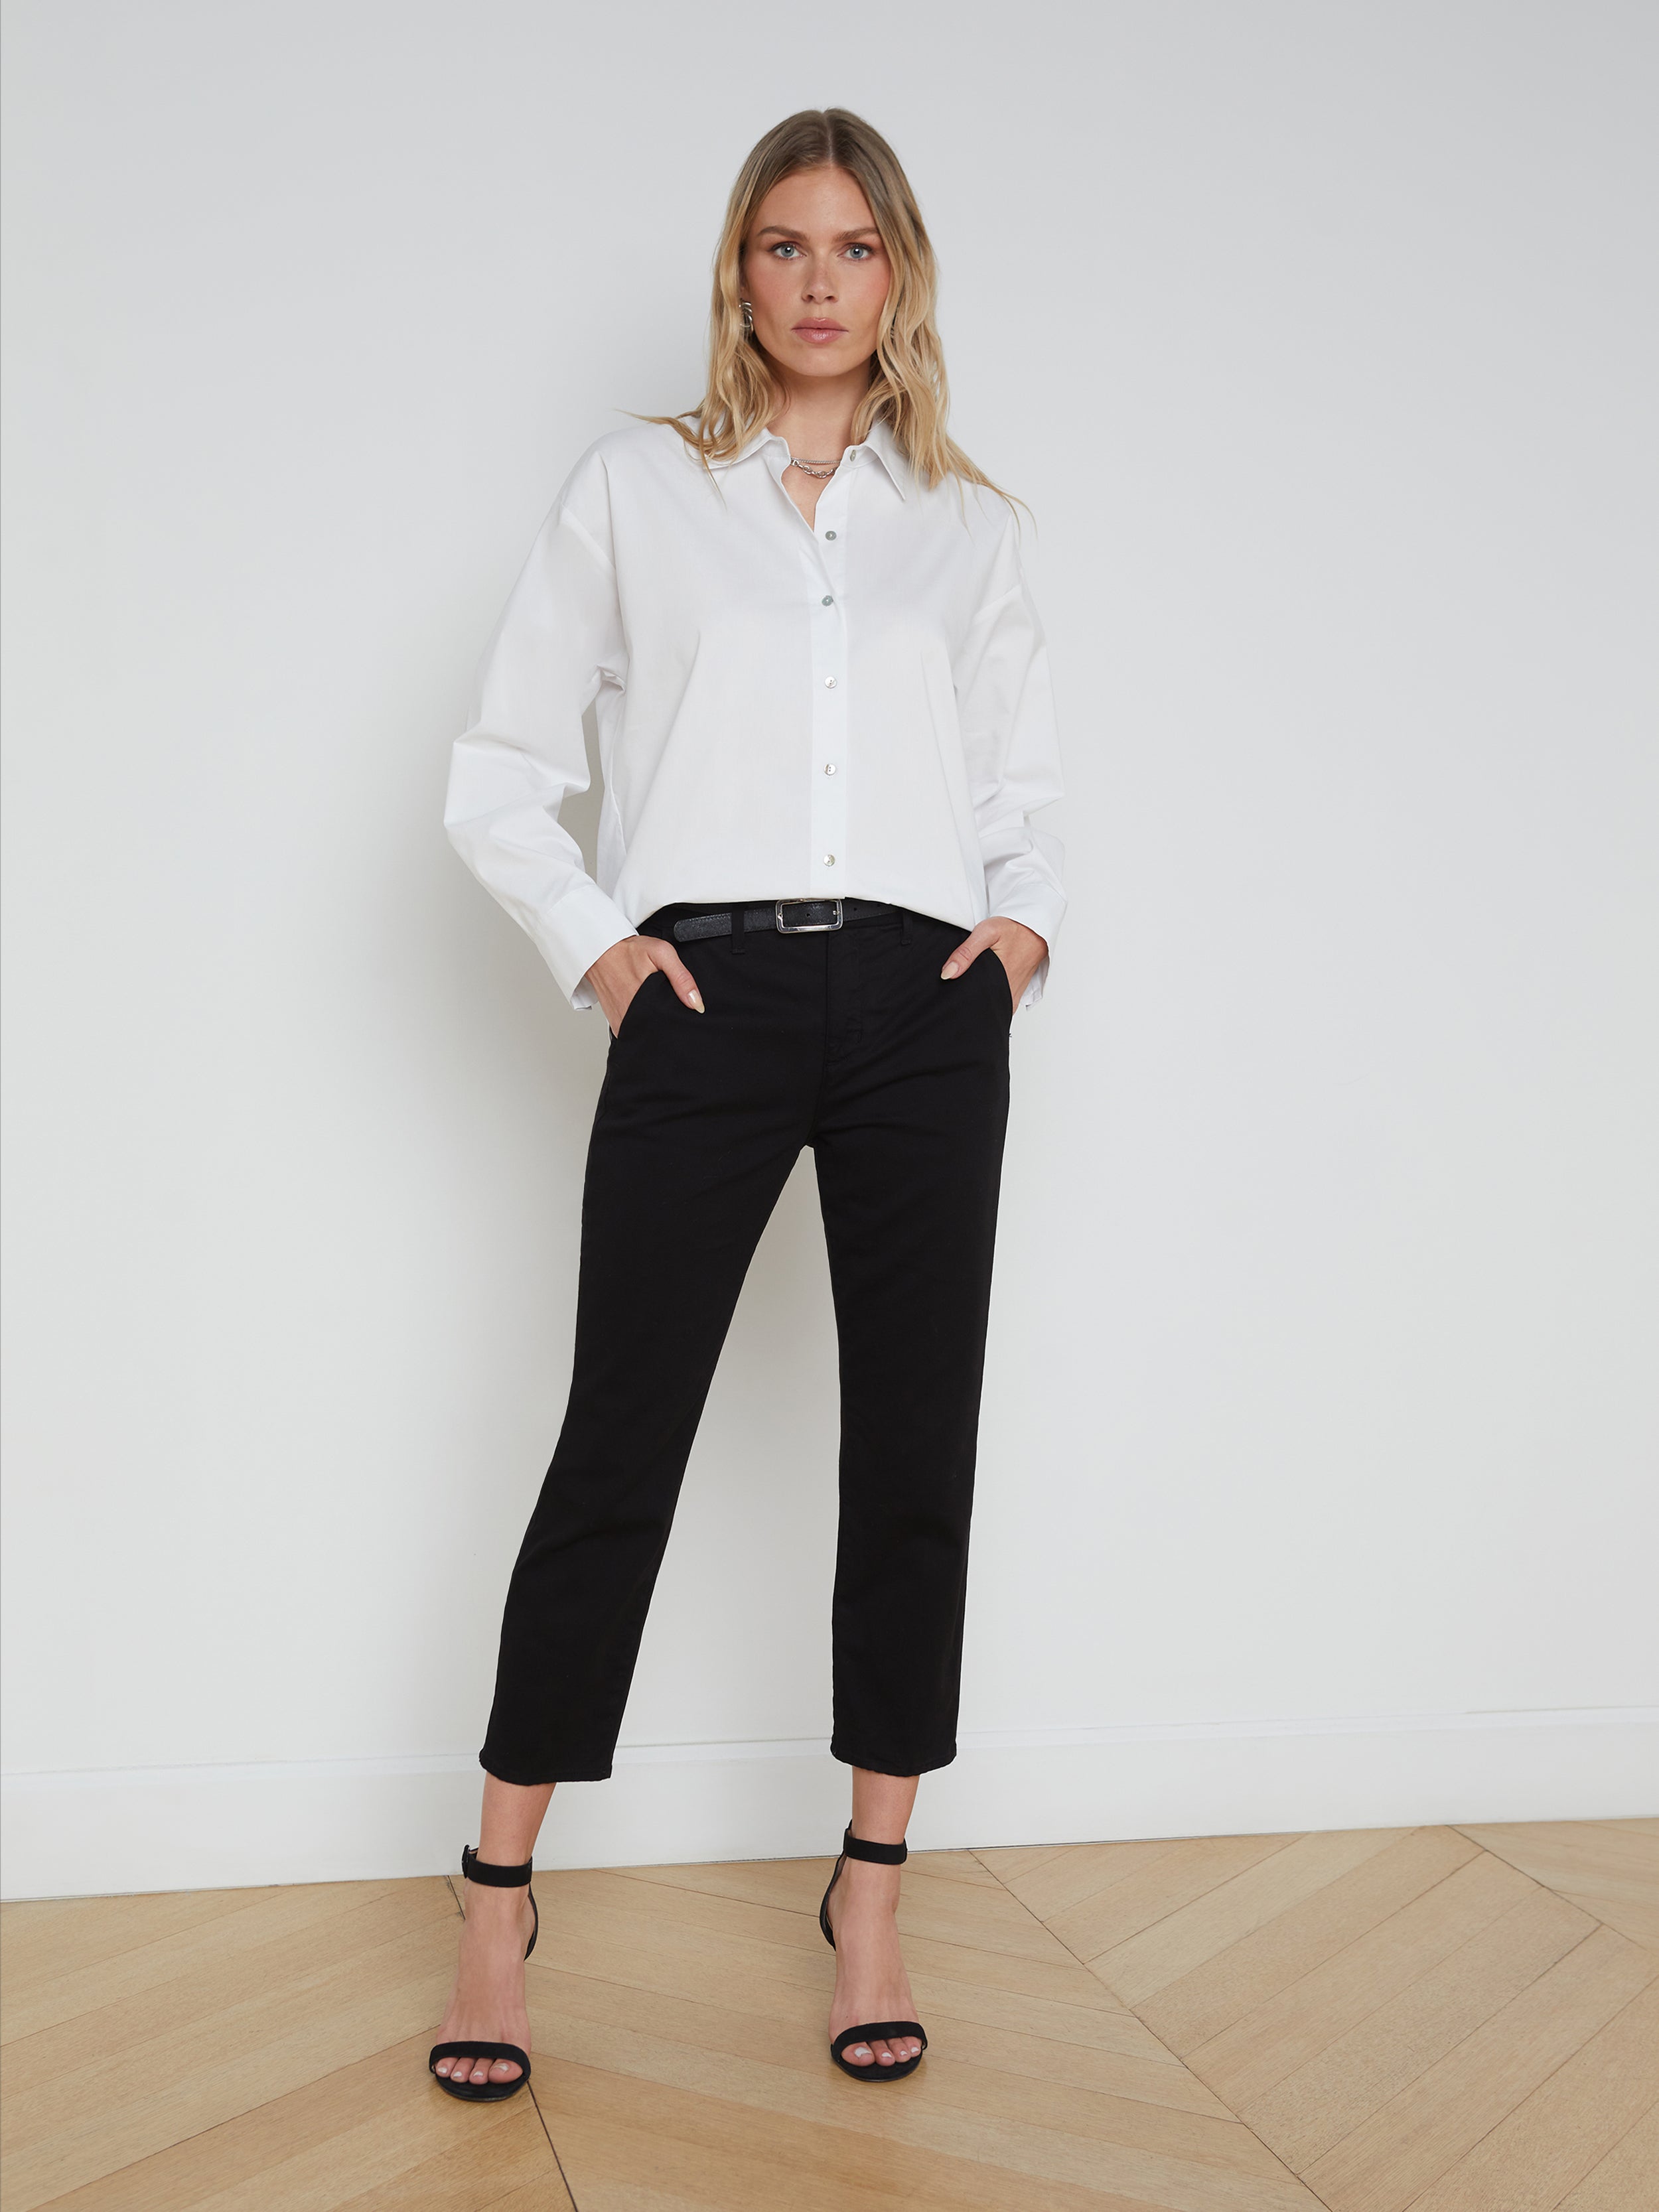 Featured: Harlow Cropped Trouser